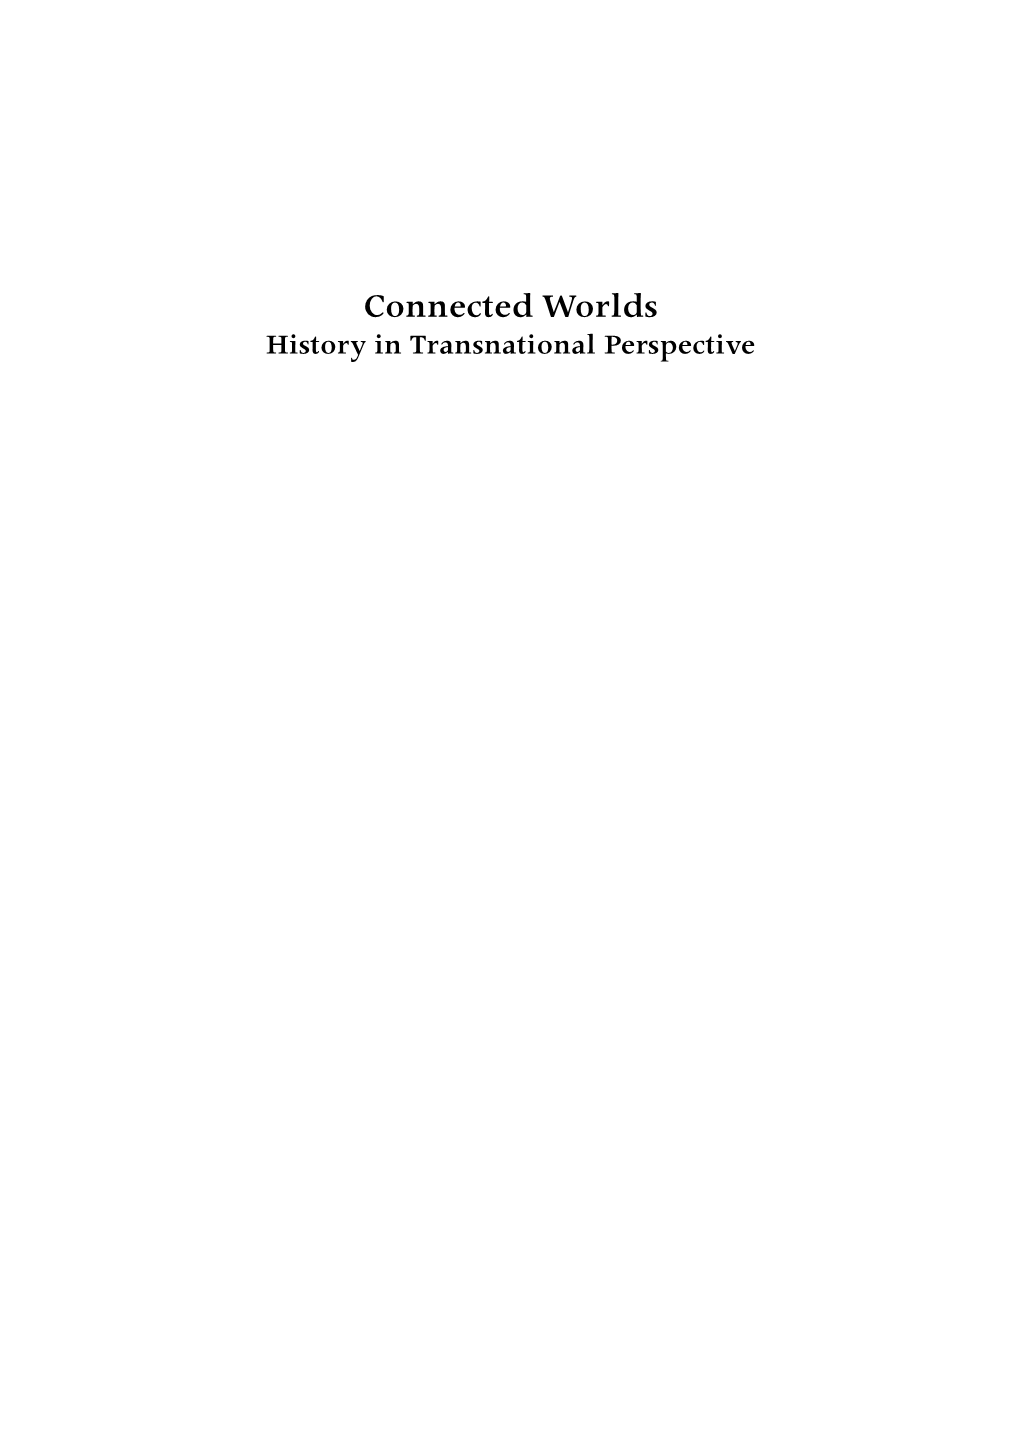 Connected Worlds: History in Transnational Perspective